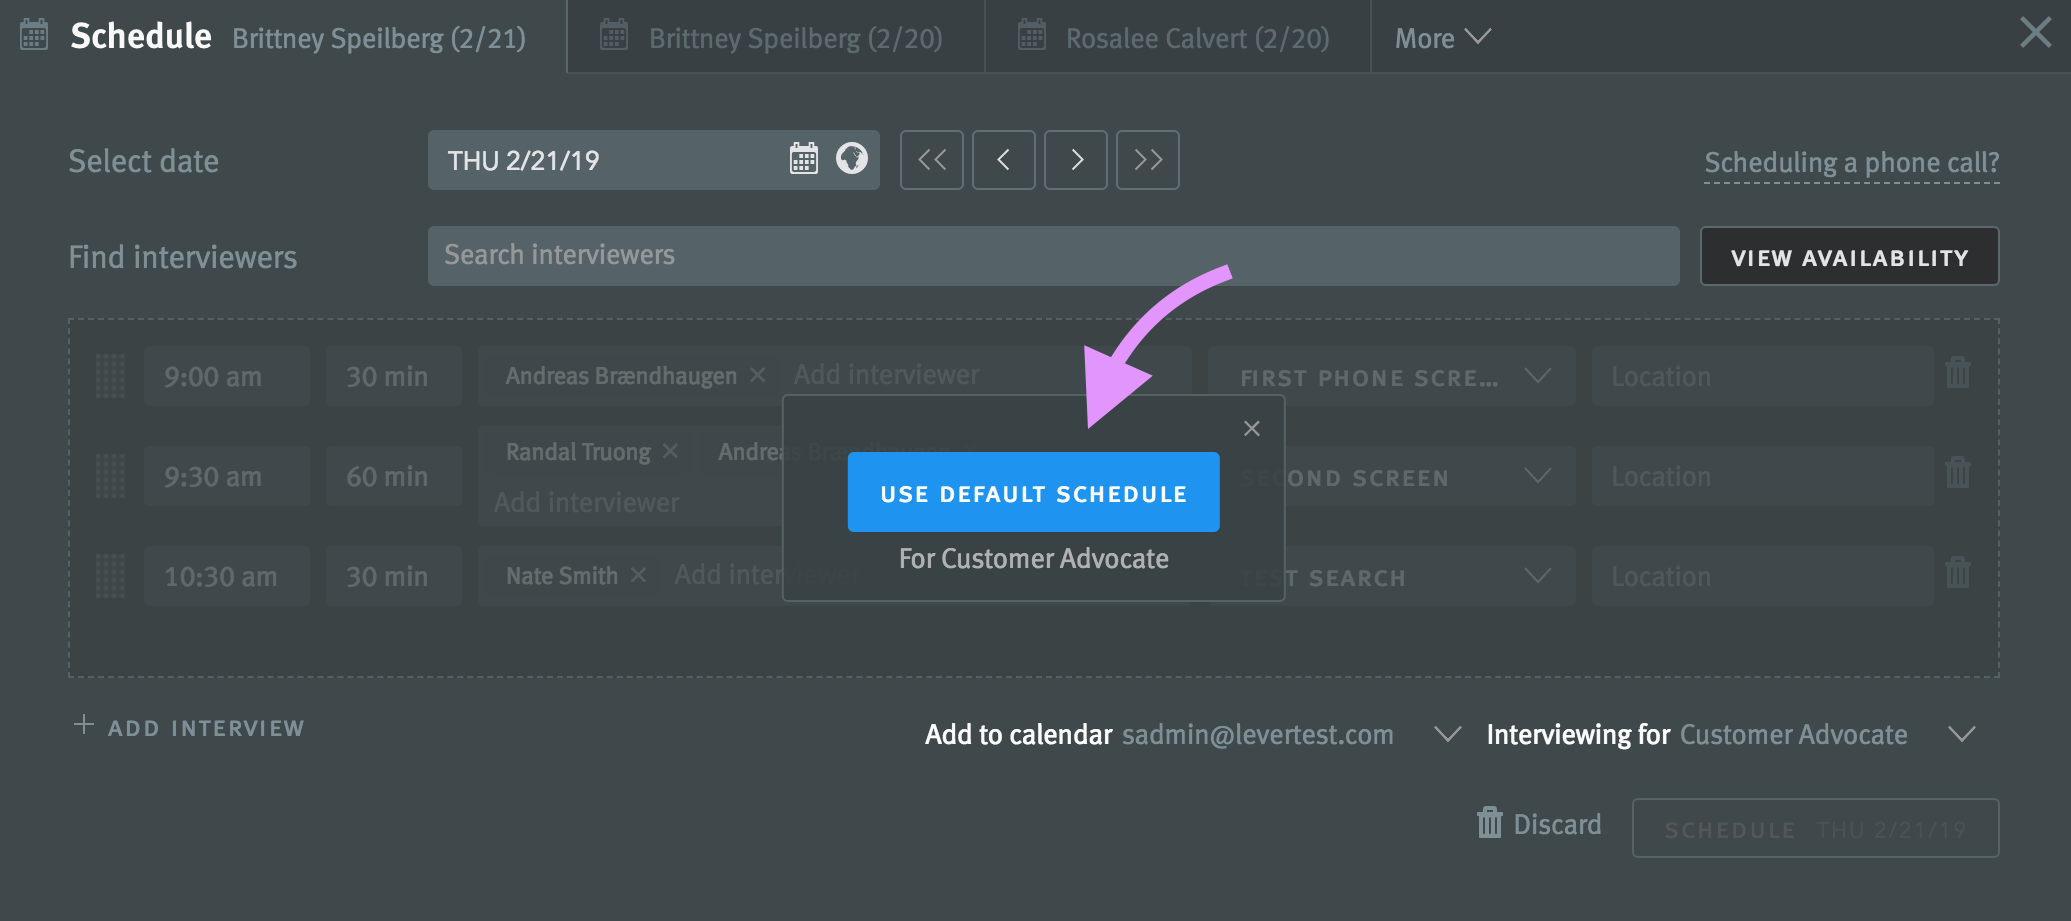 Modal in scheduler with arrow pointing to Use Default Schedule button.